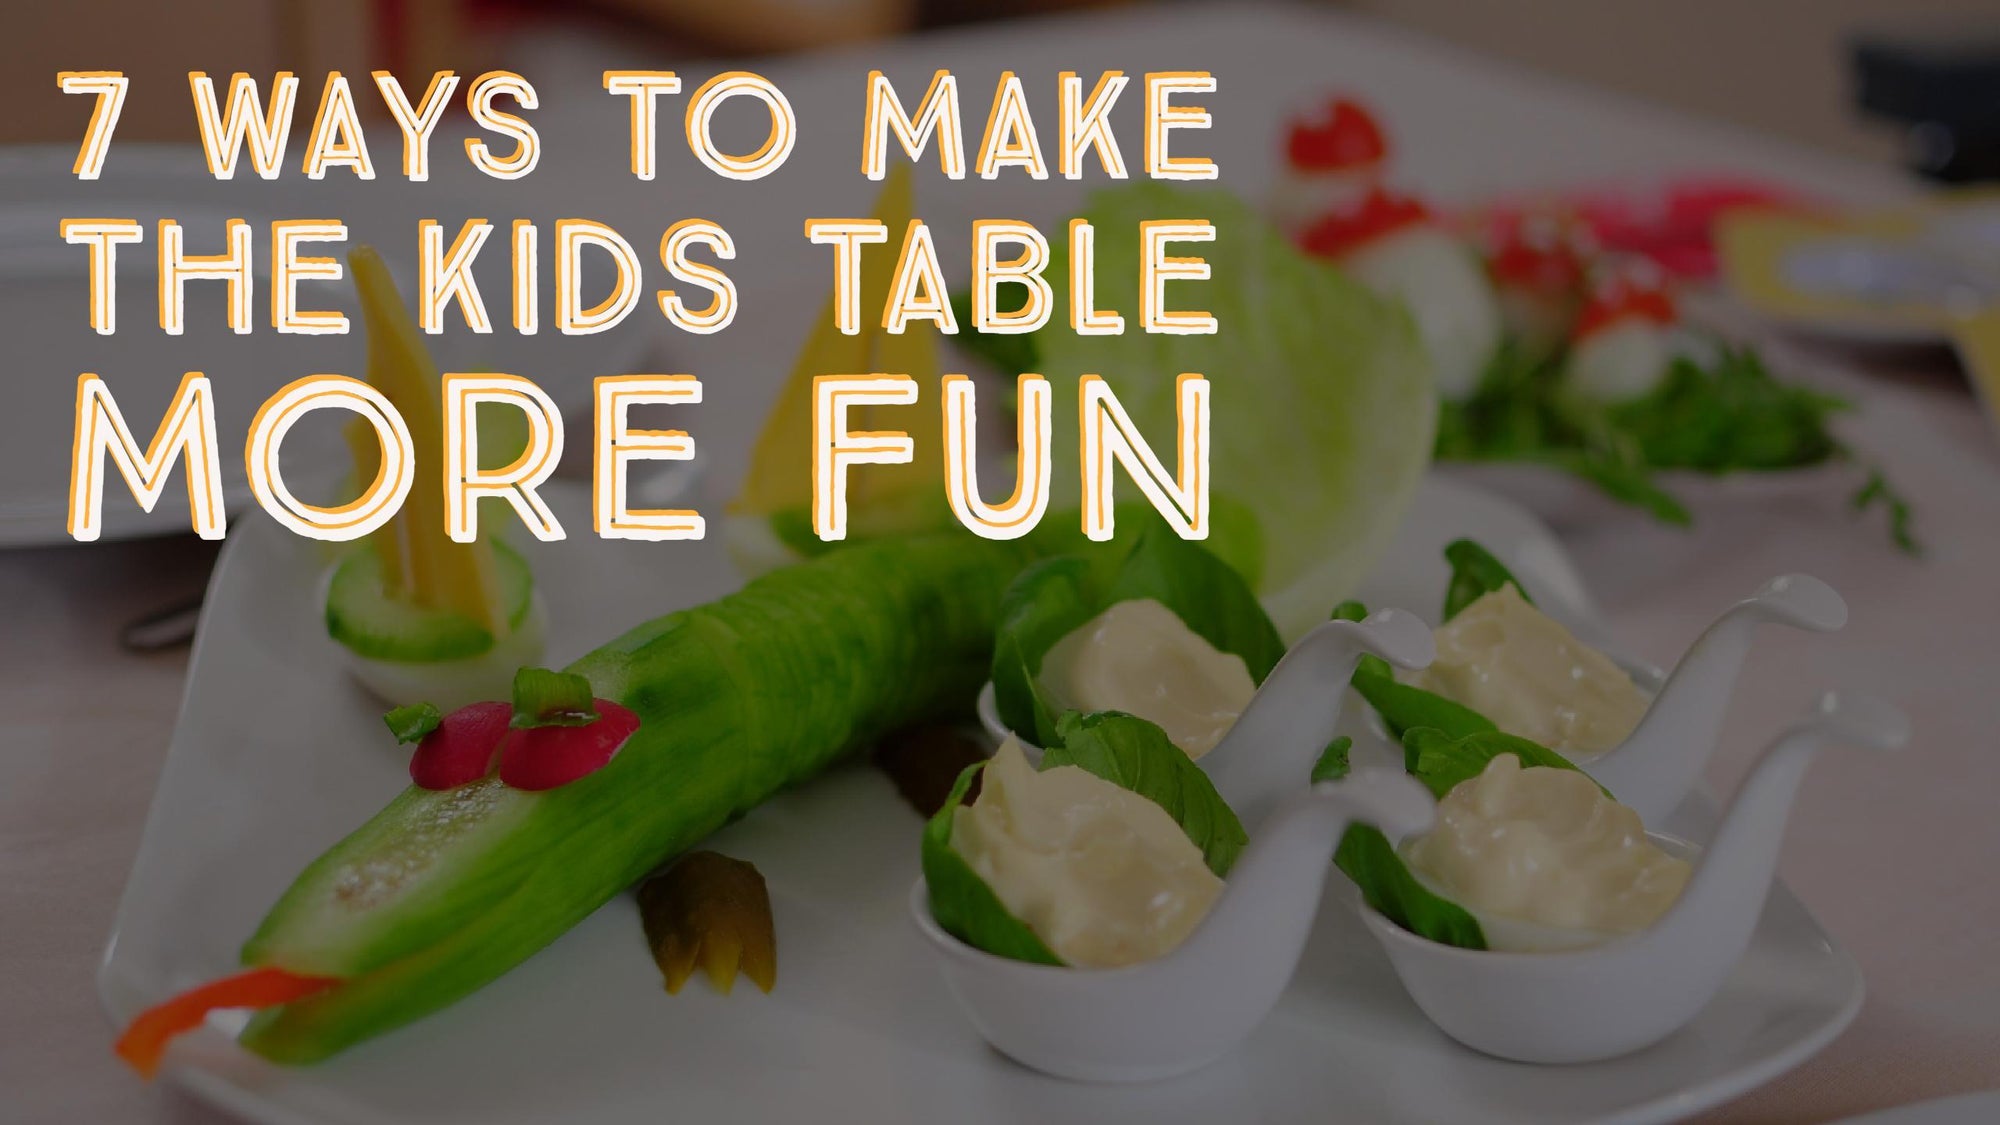 7 Ways to Make the Kids Table a Little More Fun